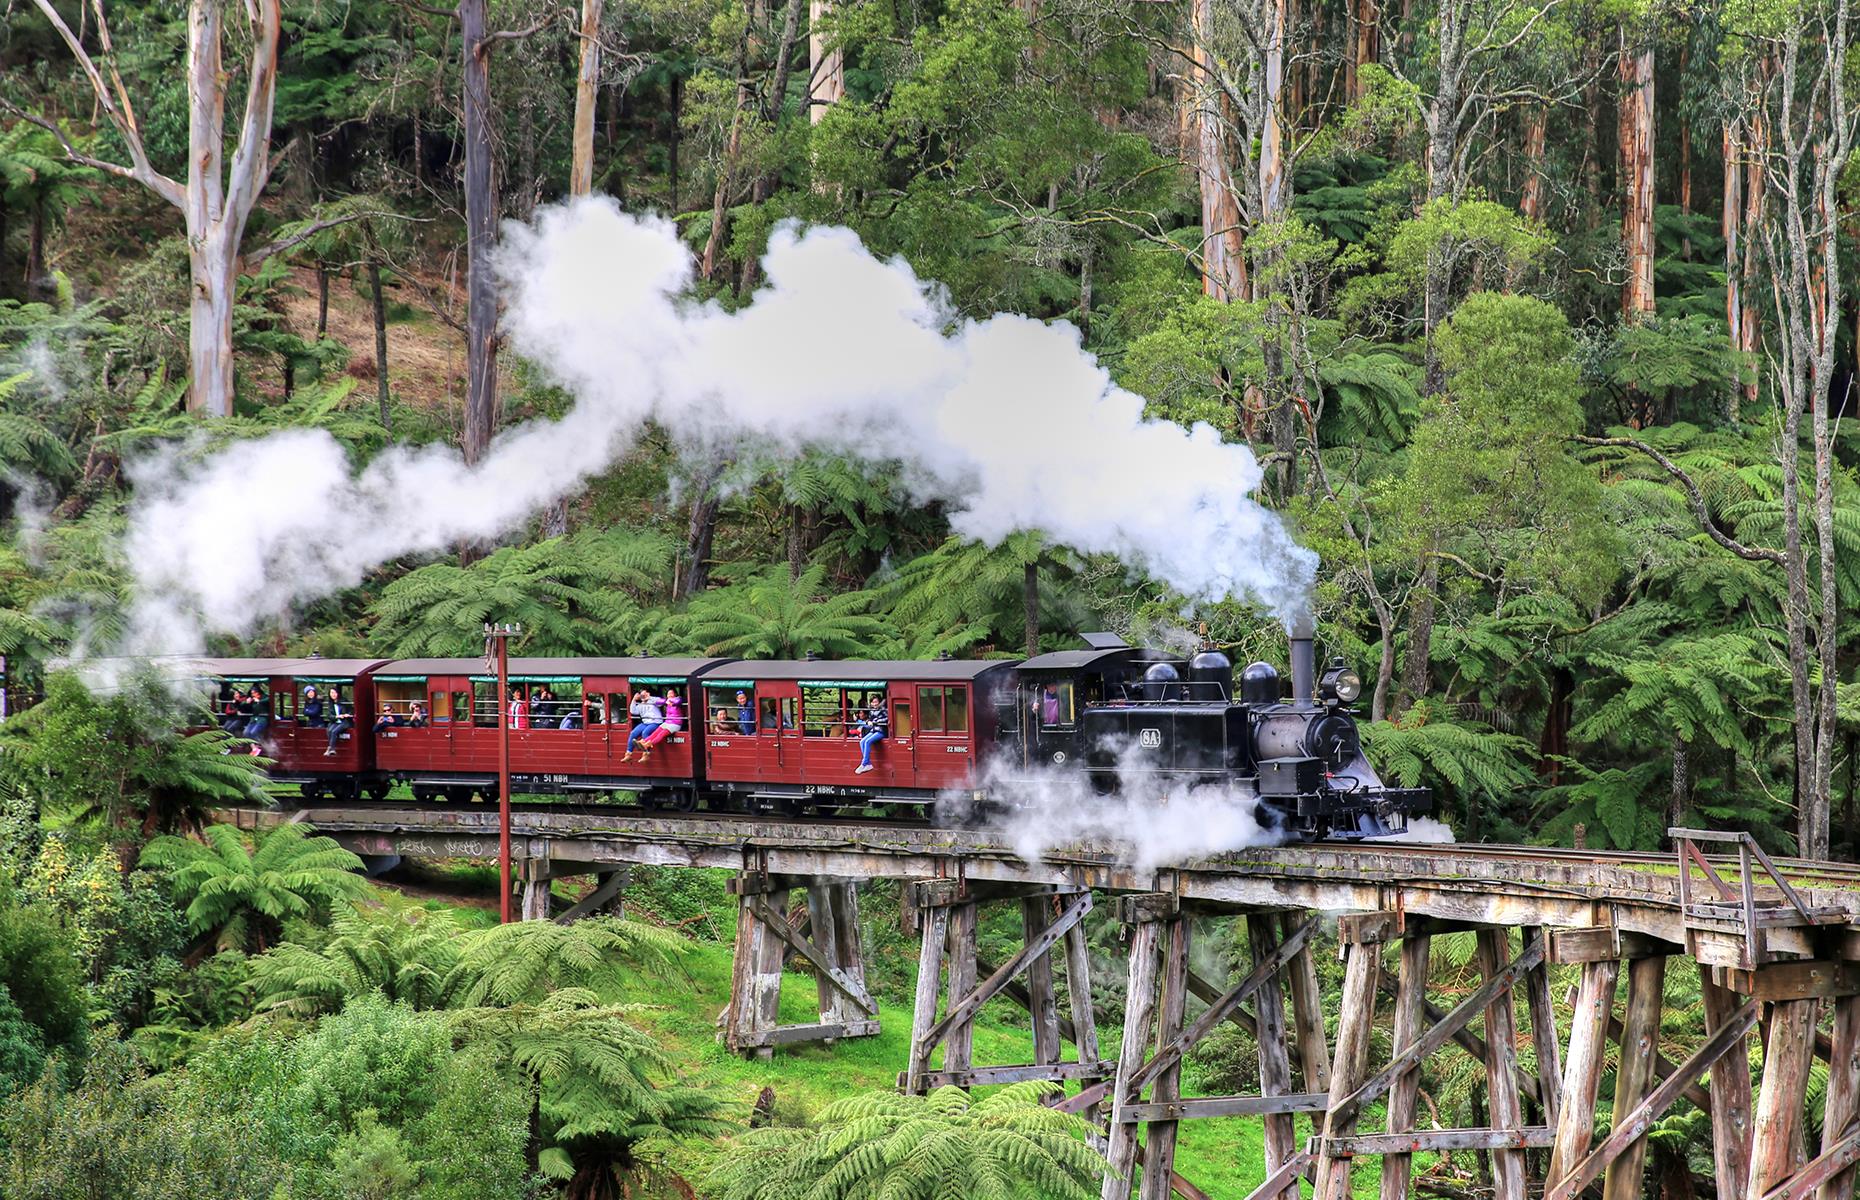 <p>It's also a hugely popular family outing too. The Puffing Billy is famed for its open-side carriages where <a href="https://puffingbilly.com.au/visit-us/sitting-on-our-carriage-sills/">people can sit on the carriage sills</a> and dangle their legs, all while taking in the views of the hills, forests, lush gullies and the railway's soaring timber trestle bridges. Trains run daily with one train offering a lunch service. Dinner service is available on Fridays and Saturdays – it's advised to book well in advance. The railway also has doggy specials known as the Puffing Billy Dog Express.</p>